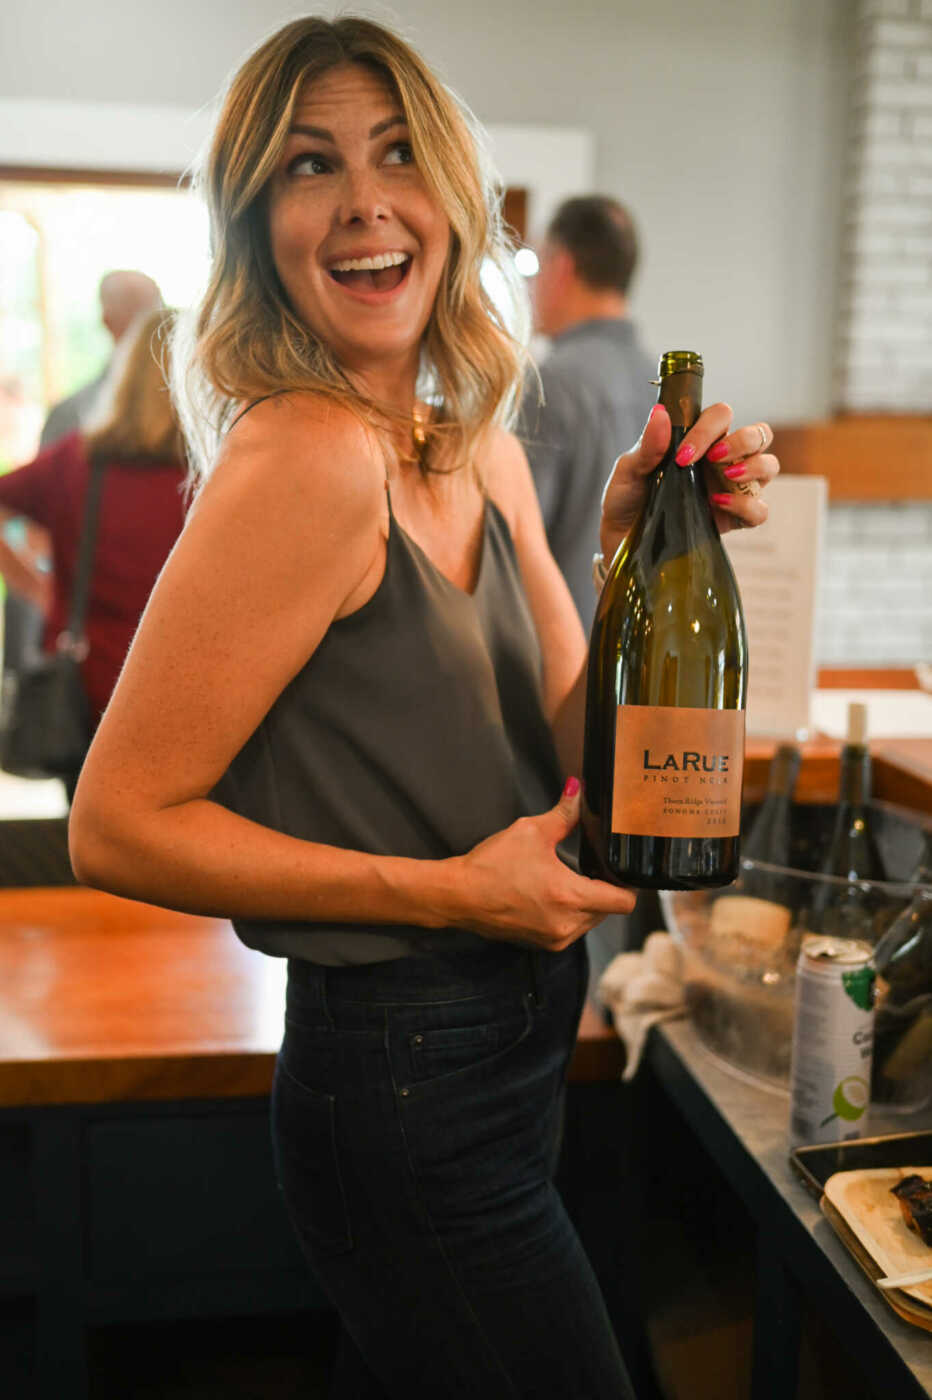 A woman holding a bottle of wine.